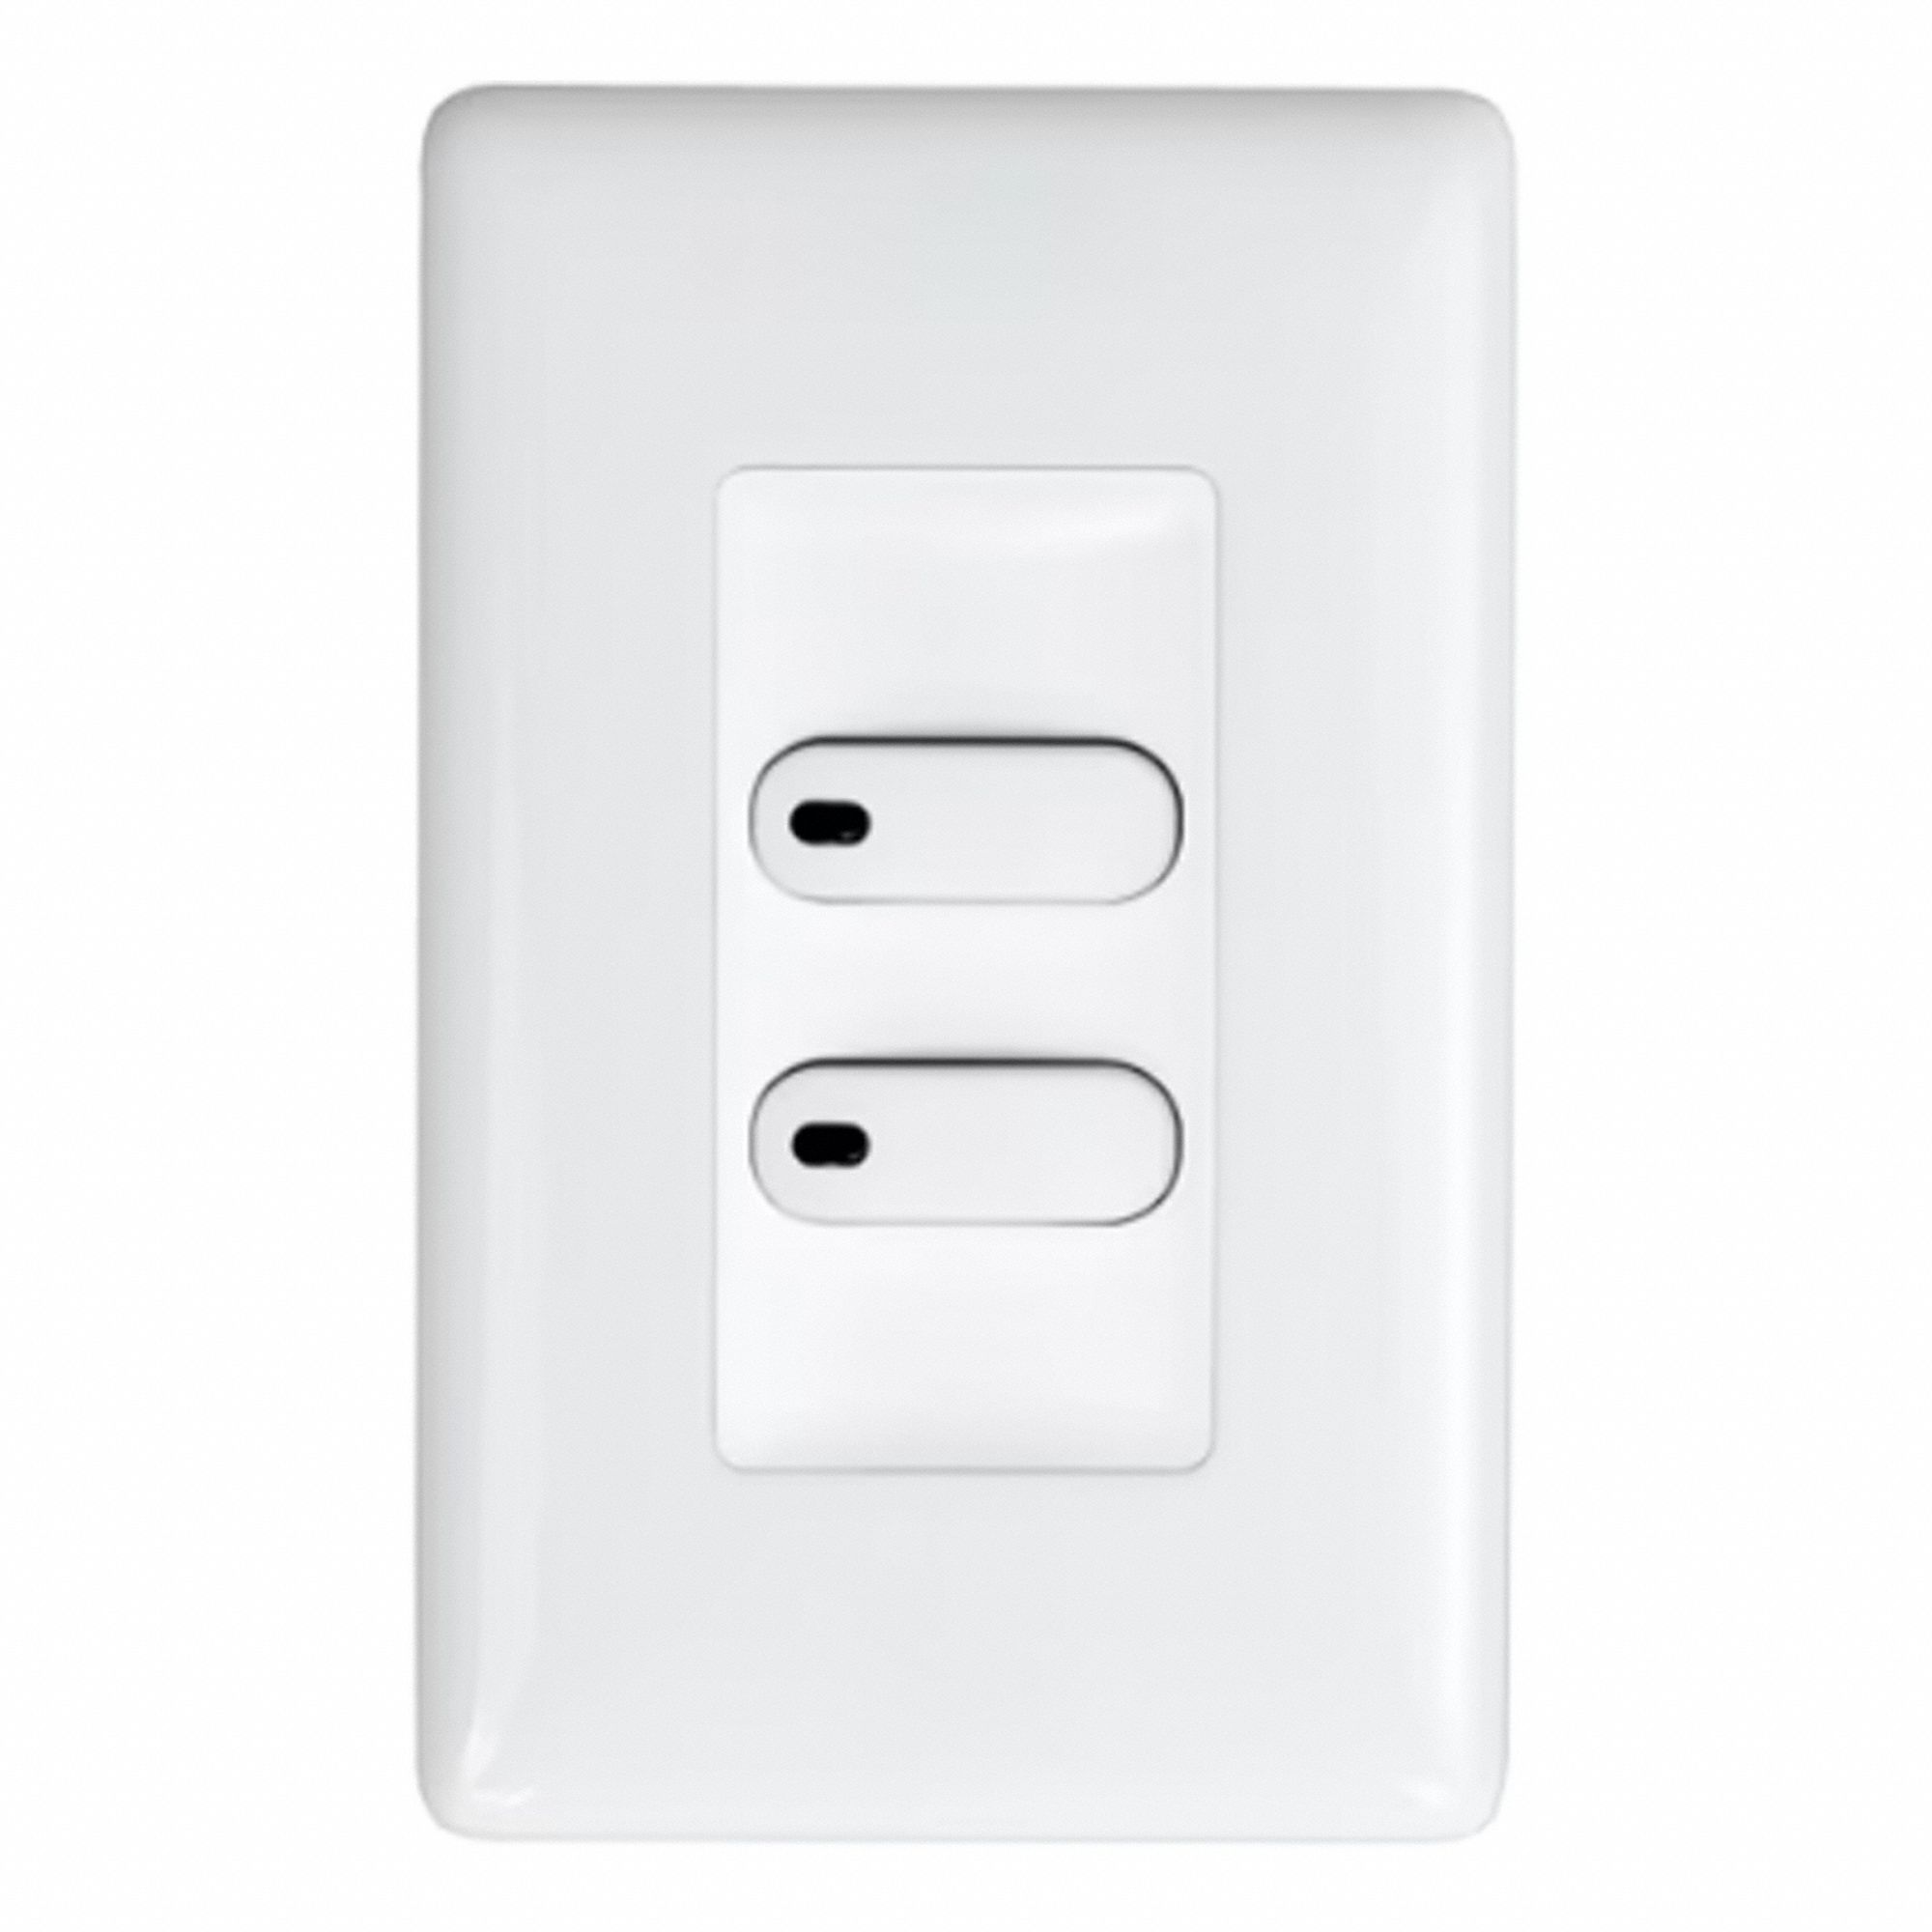 LOW-VOLT MOMENTARY 2 BUTTON WALL SWITCH